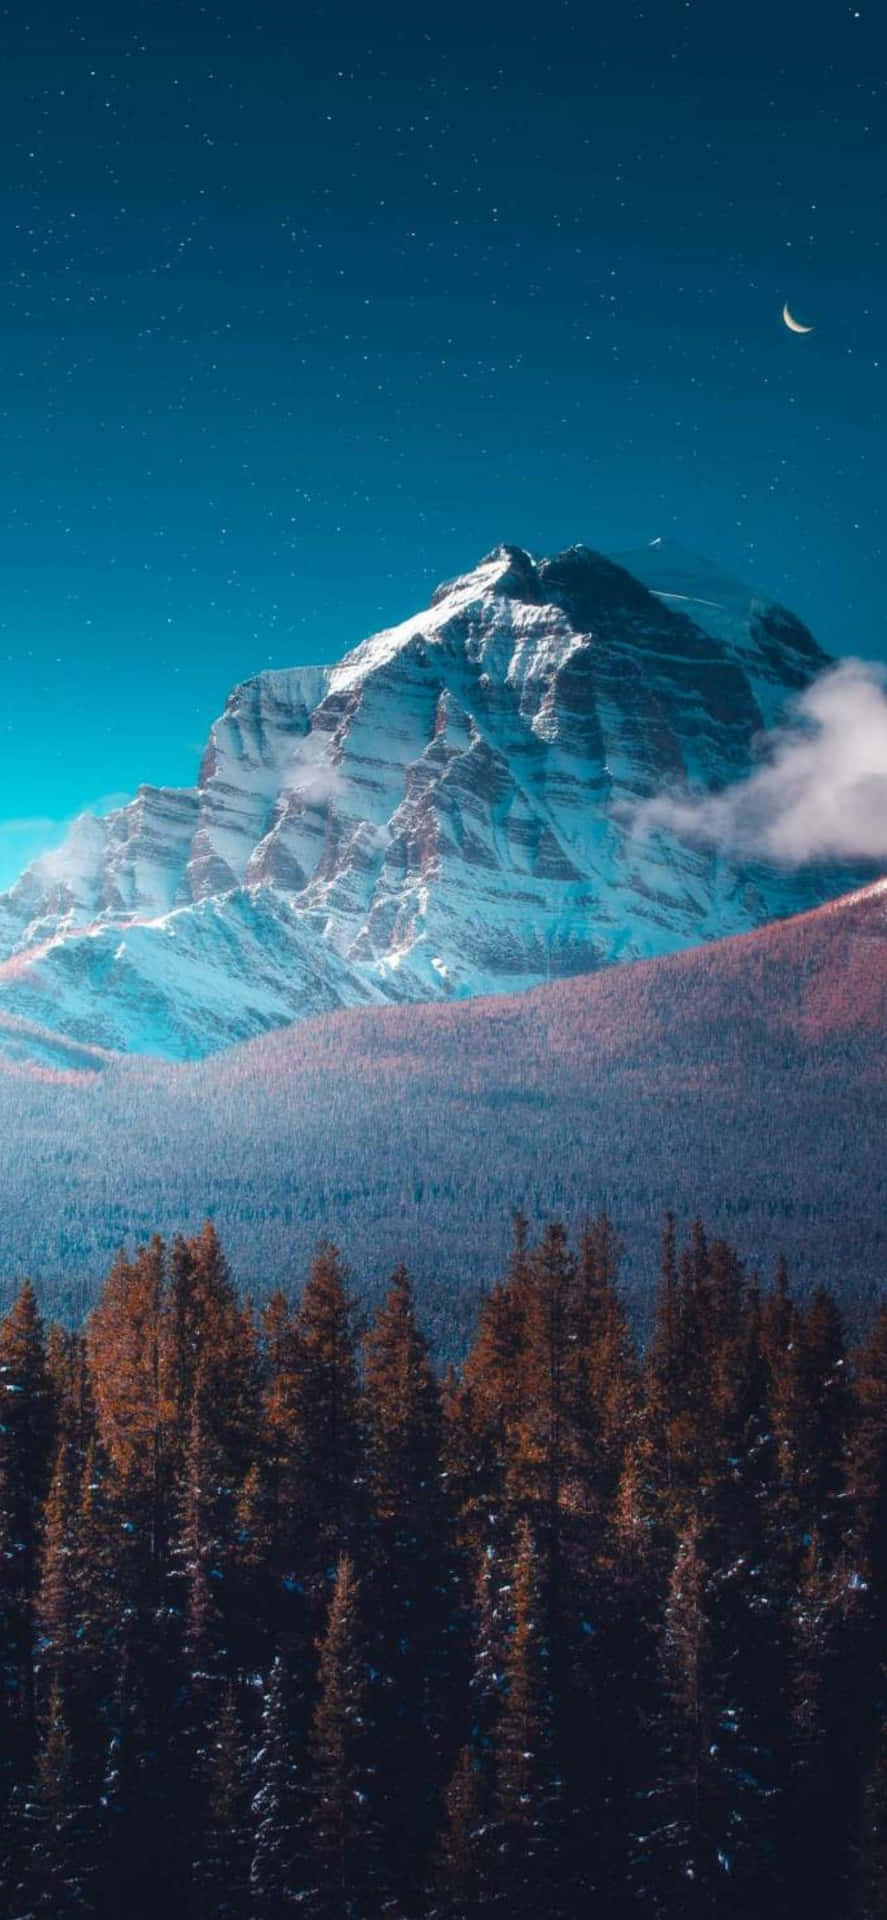 Majestic Mountain Landscape on Your iPhone